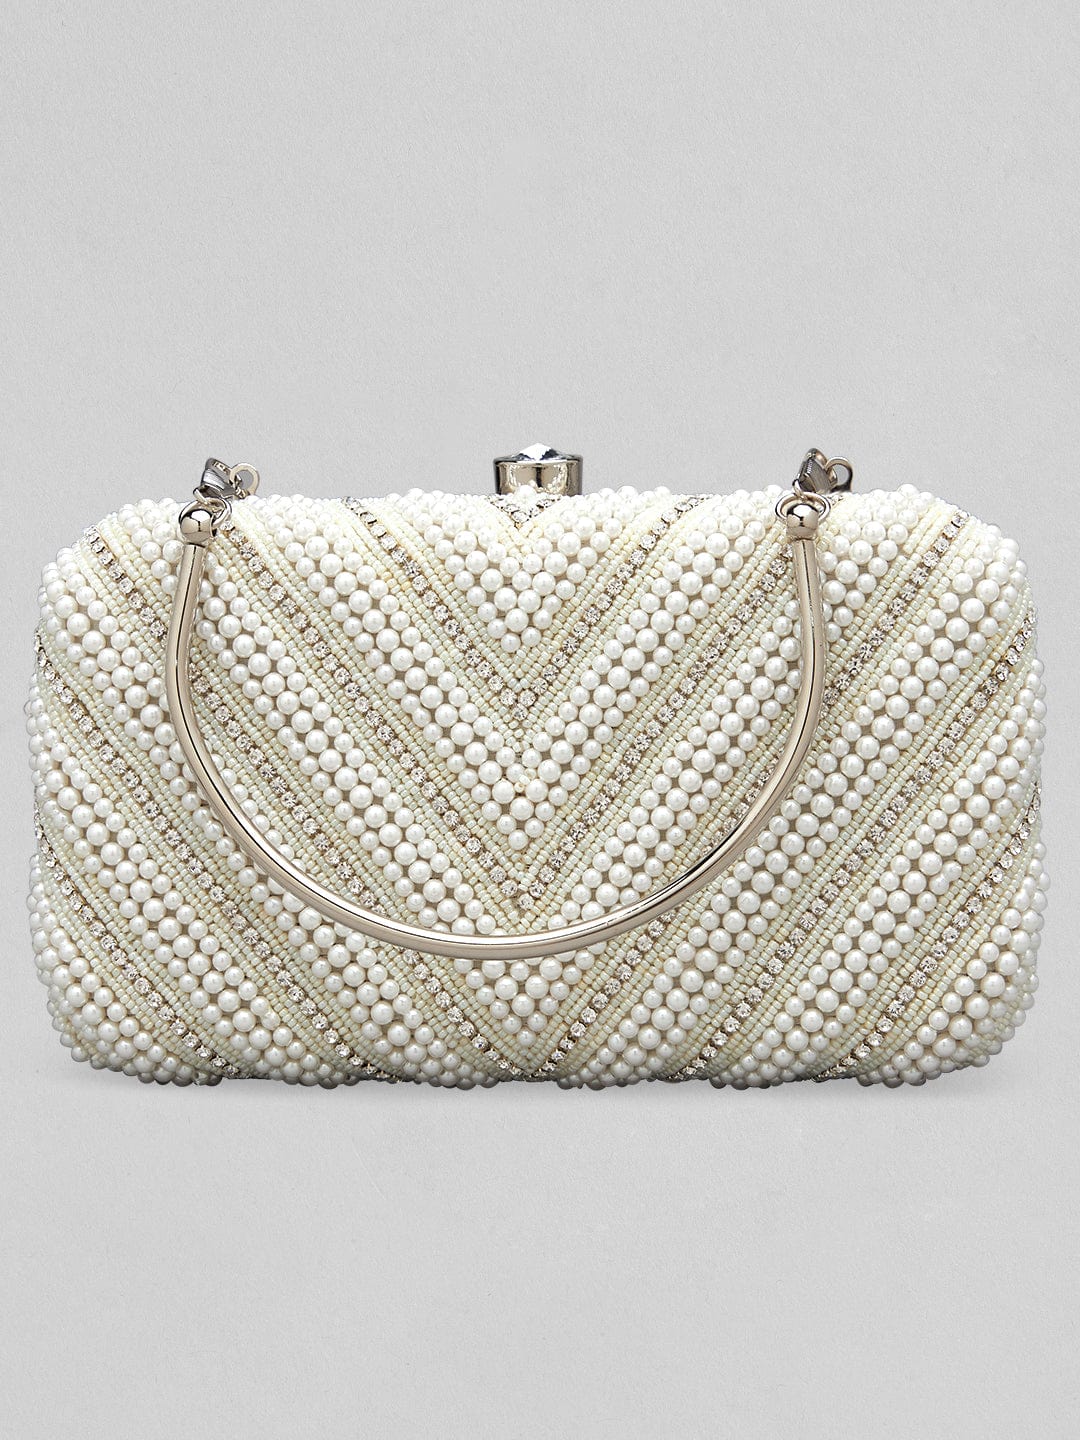 Rubans White And Cream Colour Box Clutch Sling Bag With Pearls And Embroided Design. Handbag & Wallet Accessories